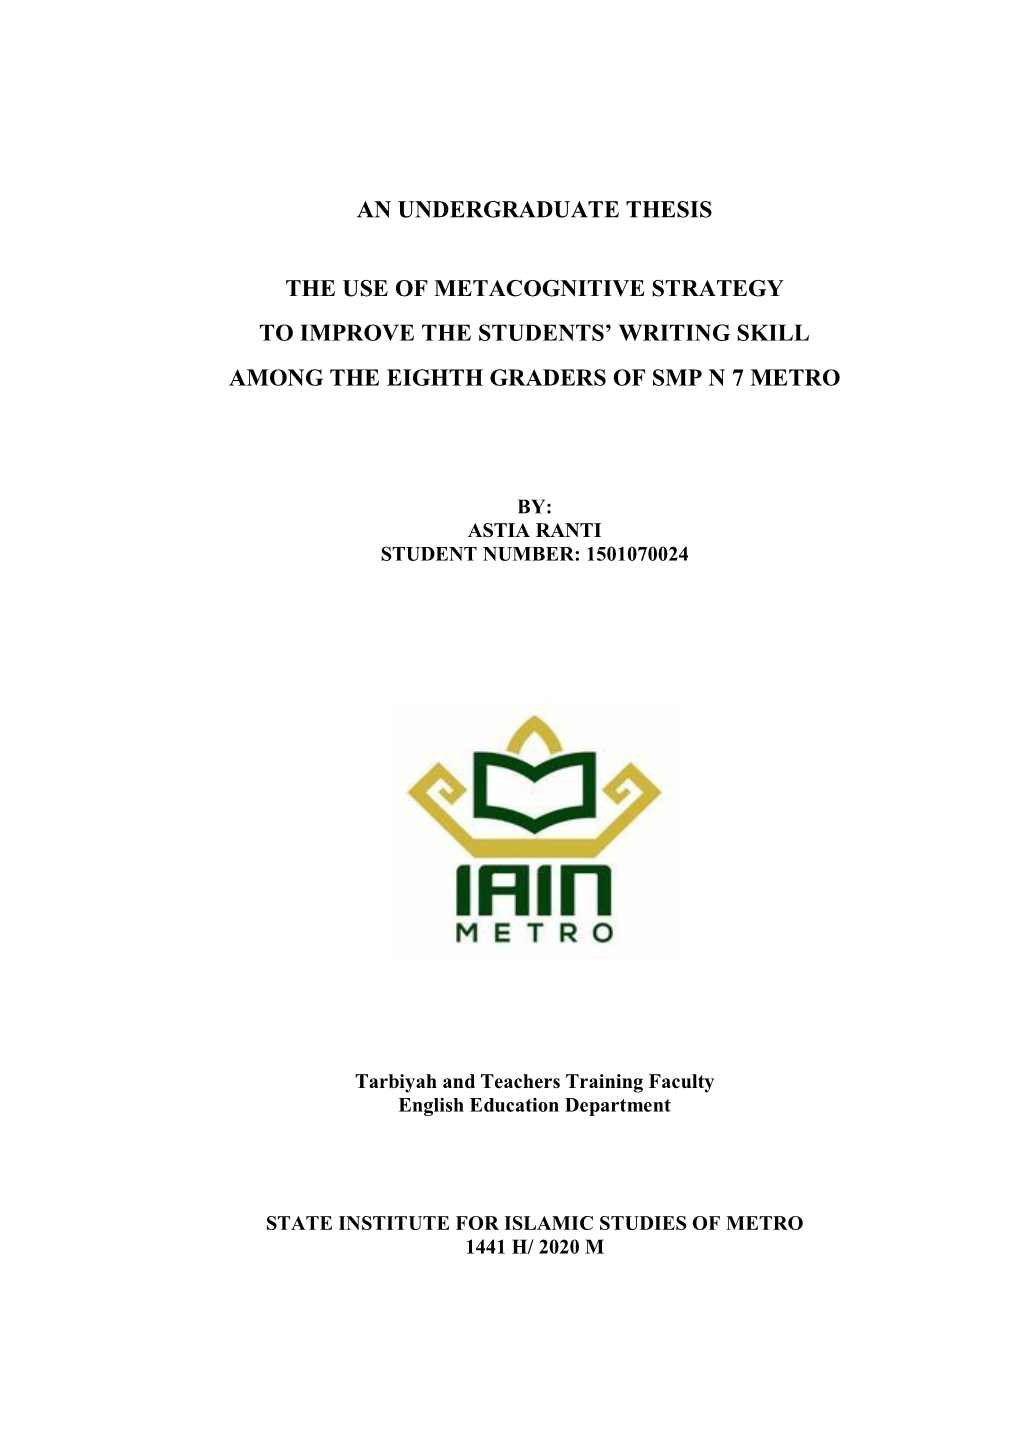 An Undergraduate Thesis the Use of Metacognitive